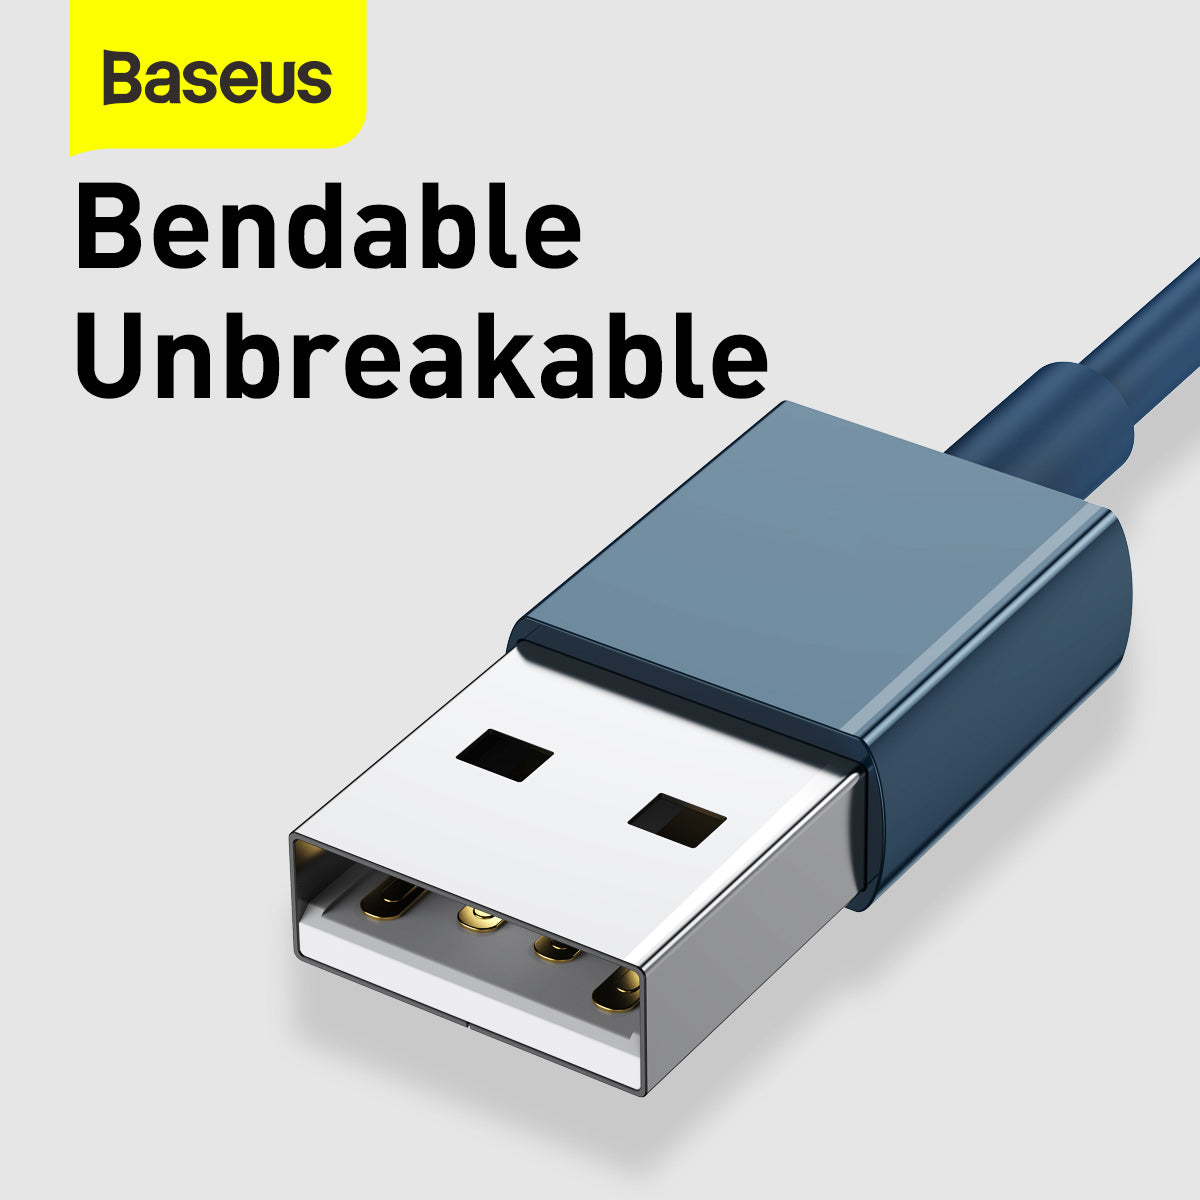 Baseus Superior Series Fast Charging Data Cable USB to M+L+C 3.5A 1.5m